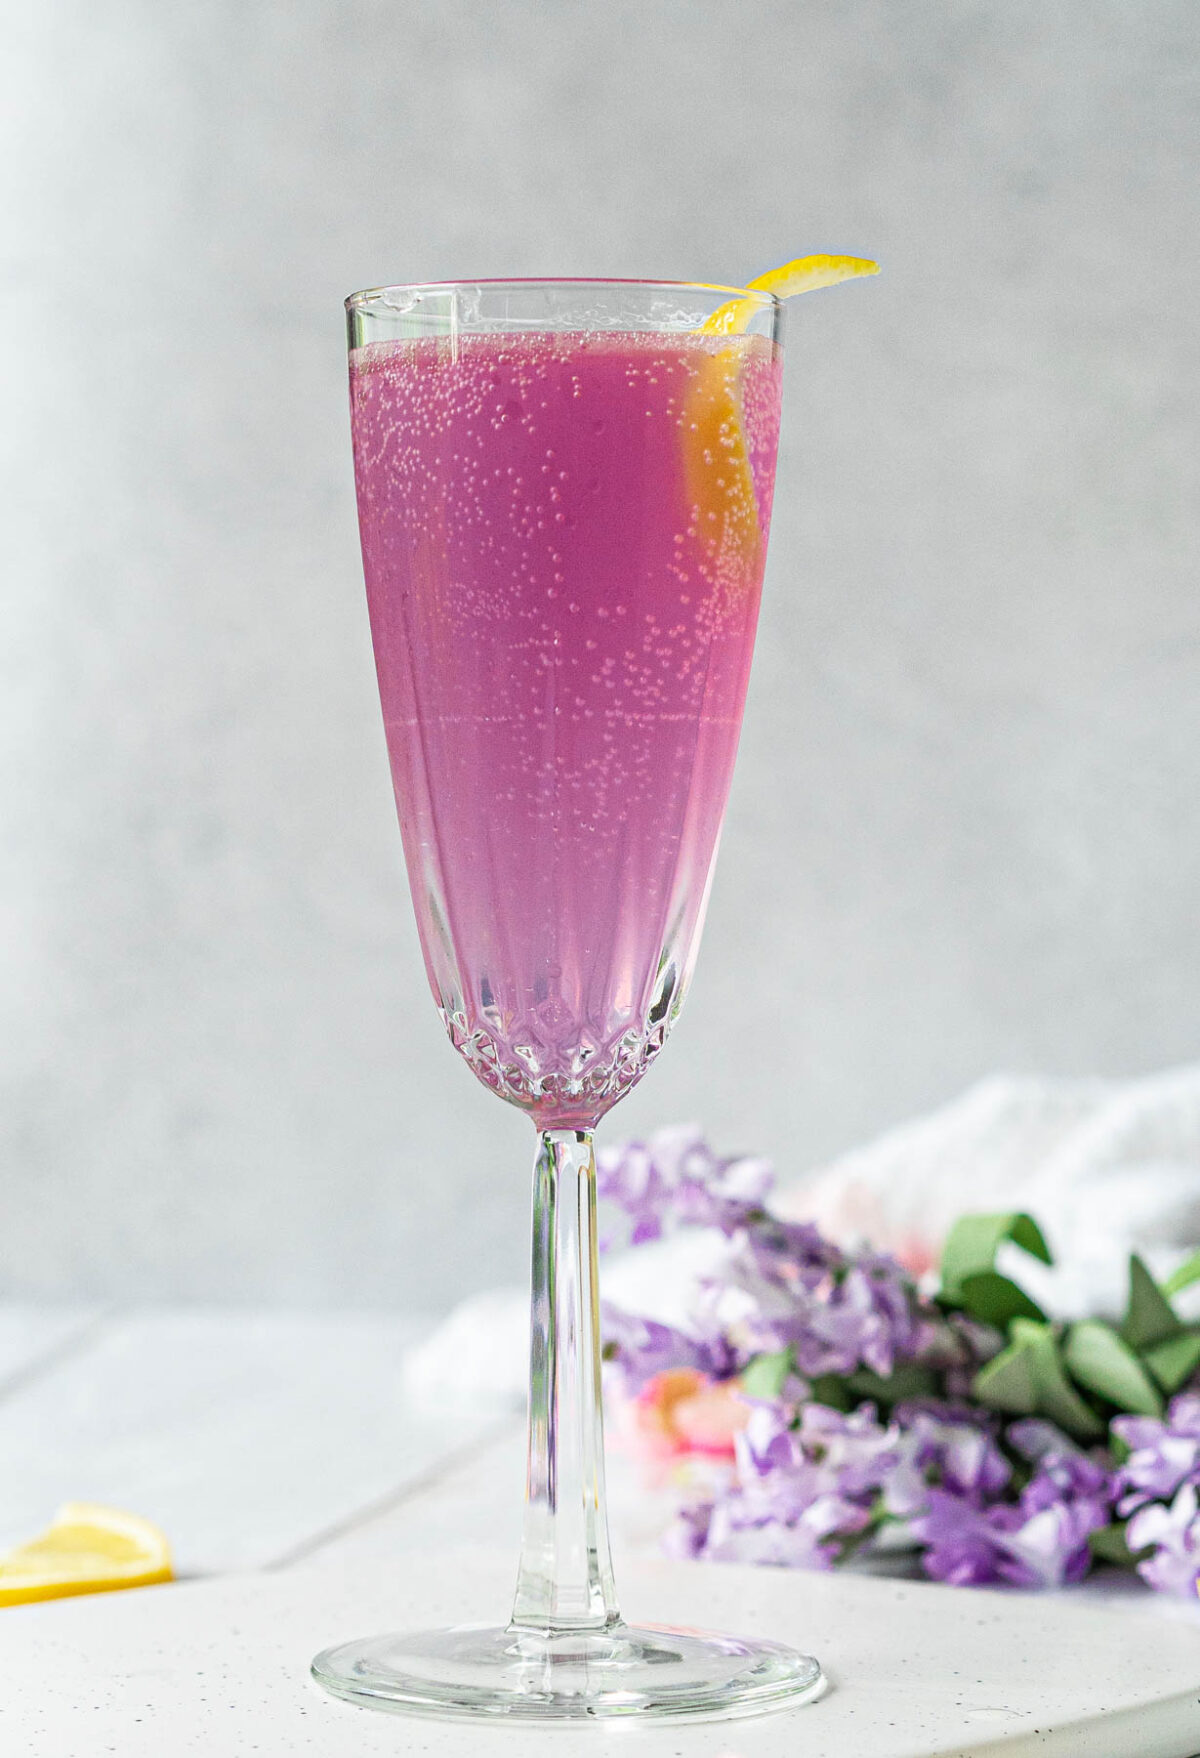 crystal champagne flute filled with a pale purple bubbling cocktail and garnished with a lemon twist